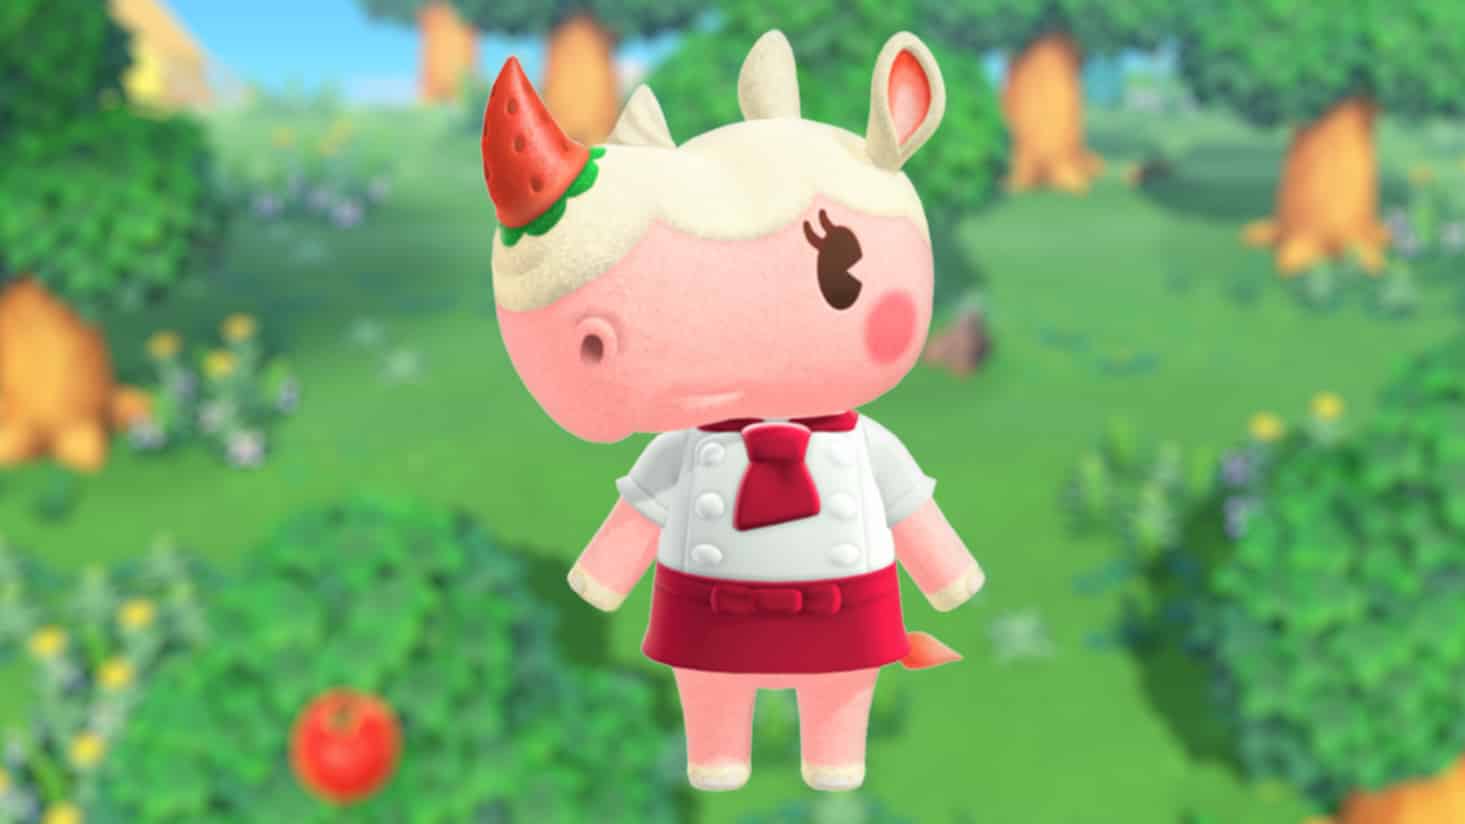 Merengue, a Rhino from Animal Crossing